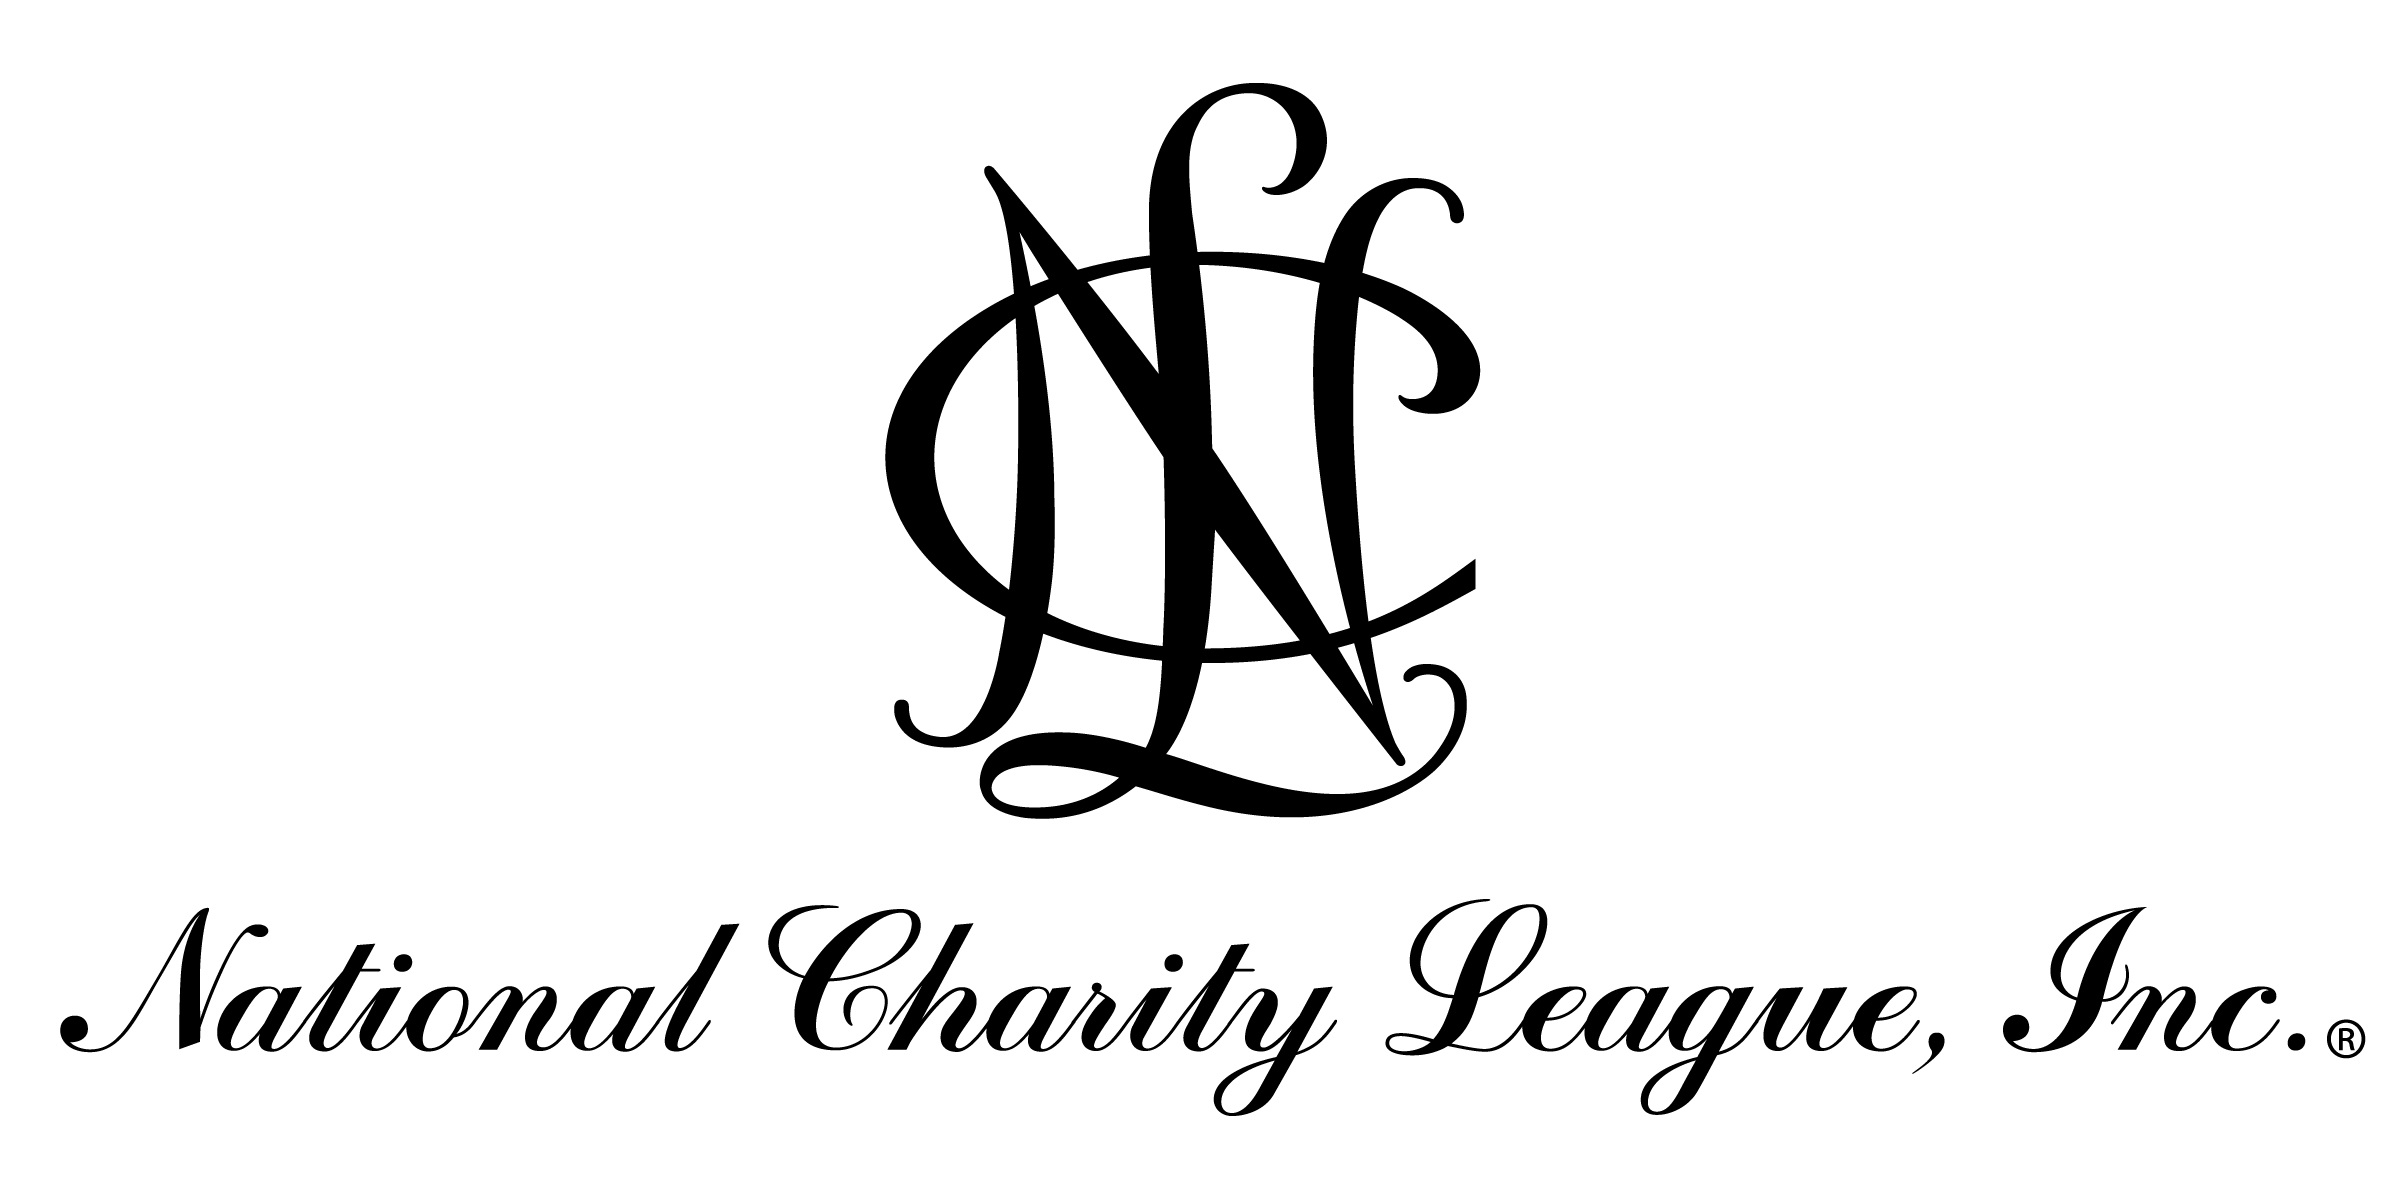 8-extraordinary-facts-about-national-charity-league